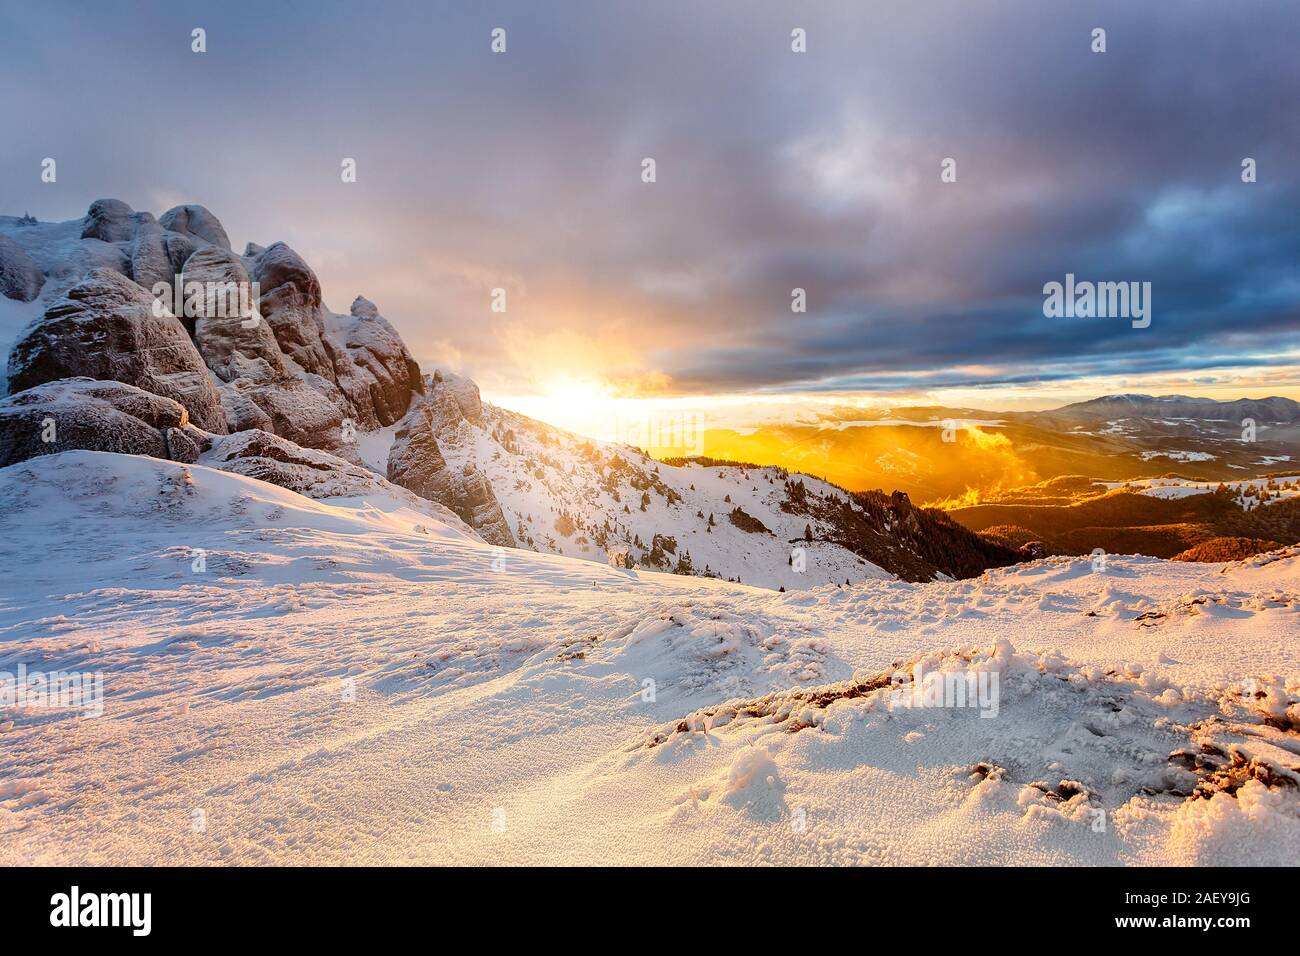 Winter mountain Sunset. Beautiful winter landscape at sunset with clouds and snow over the mountain cliffs. Stock Photo